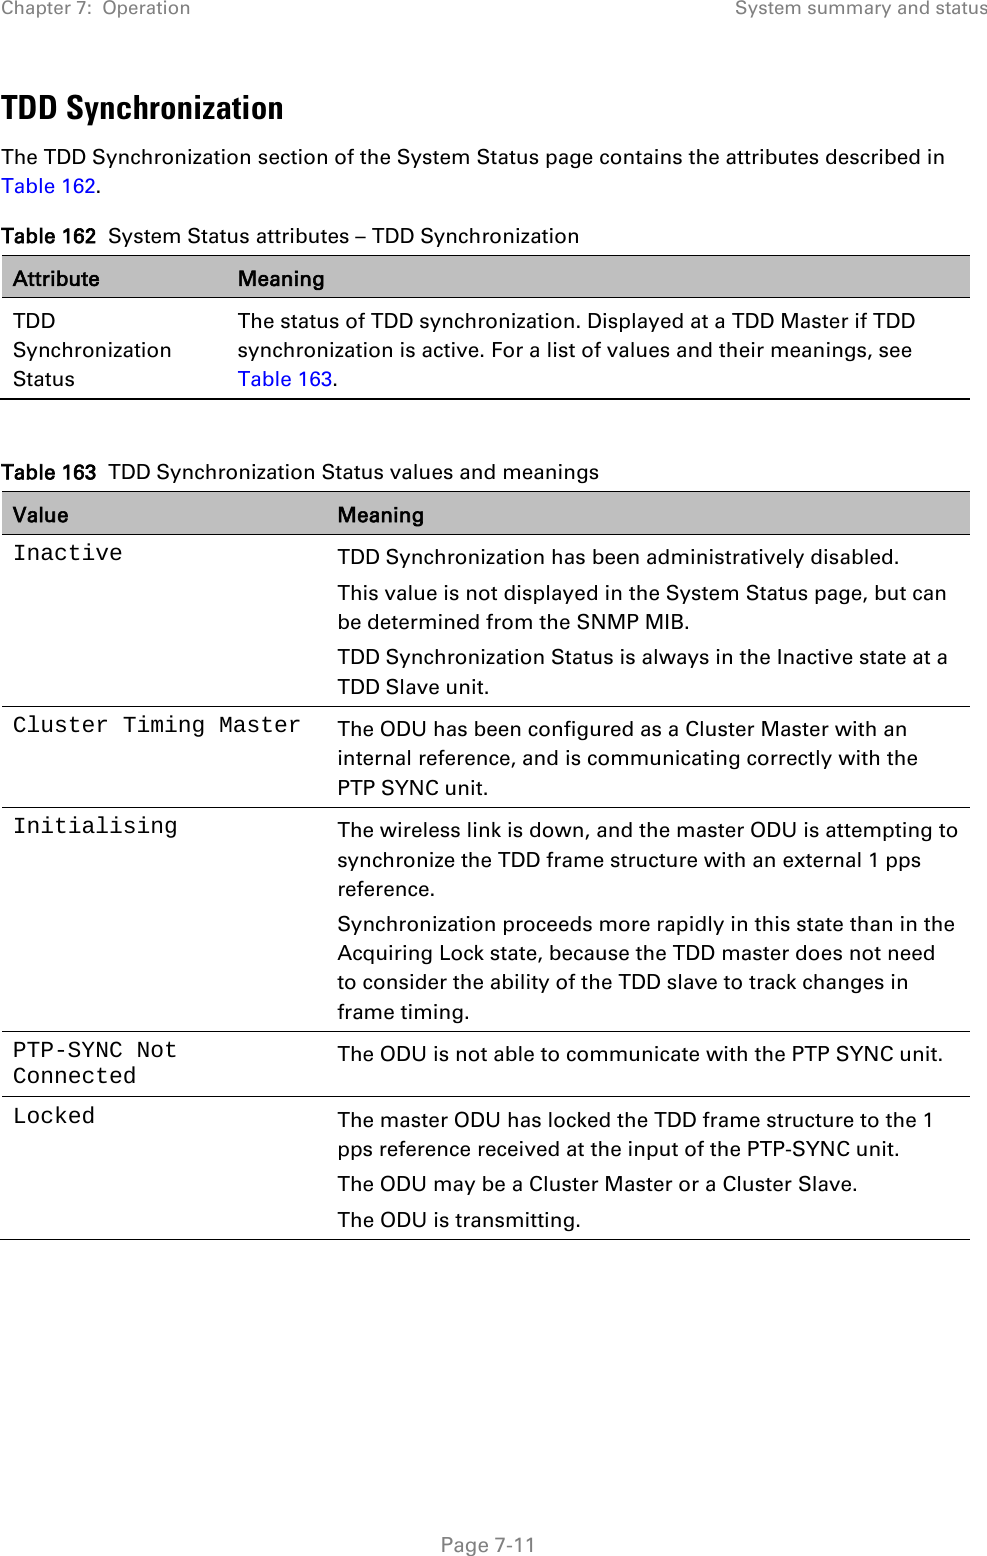 Chapter 7:  Operation System summary and status  TDD Synchronization The TDD Synchronization section of the System Status page contains the attributes described in Table 162. Table 162  System Status attributes – TDD Synchronization Attribute Meaning TDD Synchronization Status The status of TDD synchronization. Displayed at a TDD Master if TDD synchronization is active. For a list of values and their meanings, see Table 163.  Table 163  TDD Synchronization Status values and meanings Value Meaning Inactive TDD Synchronization has been administratively disabled. This value is not displayed in the System Status page, but can be determined from the SNMP MIB. TDD Synchronization Status is always in the Inactive state at a TDD Slave unit. Cluster Timing Master The ODU has been configured as a Cluster Master with an internal reference, and is communicating correctly with the PTP SYNC unit. Initialising The wireless link is down, and the master ODU is attempting to synchronize the TDD frame structure with an external 1 pps reference. Synchronization proceeds more rapidly in this state than in the Acquiring Lock state, because the TDD master does not need to consider the ability of the TDD slave to track changes in frame timing. PTP-SYNC Not Connected The ODU is not able to communicate with the PTP SYNC unit. Locked The master ODU has locked the TDD frame structure to the 1 pps reference received at the input of the PTP-SYNC unit. The ODU may be a Cluster Master or a Cluster Slave. The ODU is transmitting.  Page 7-11 